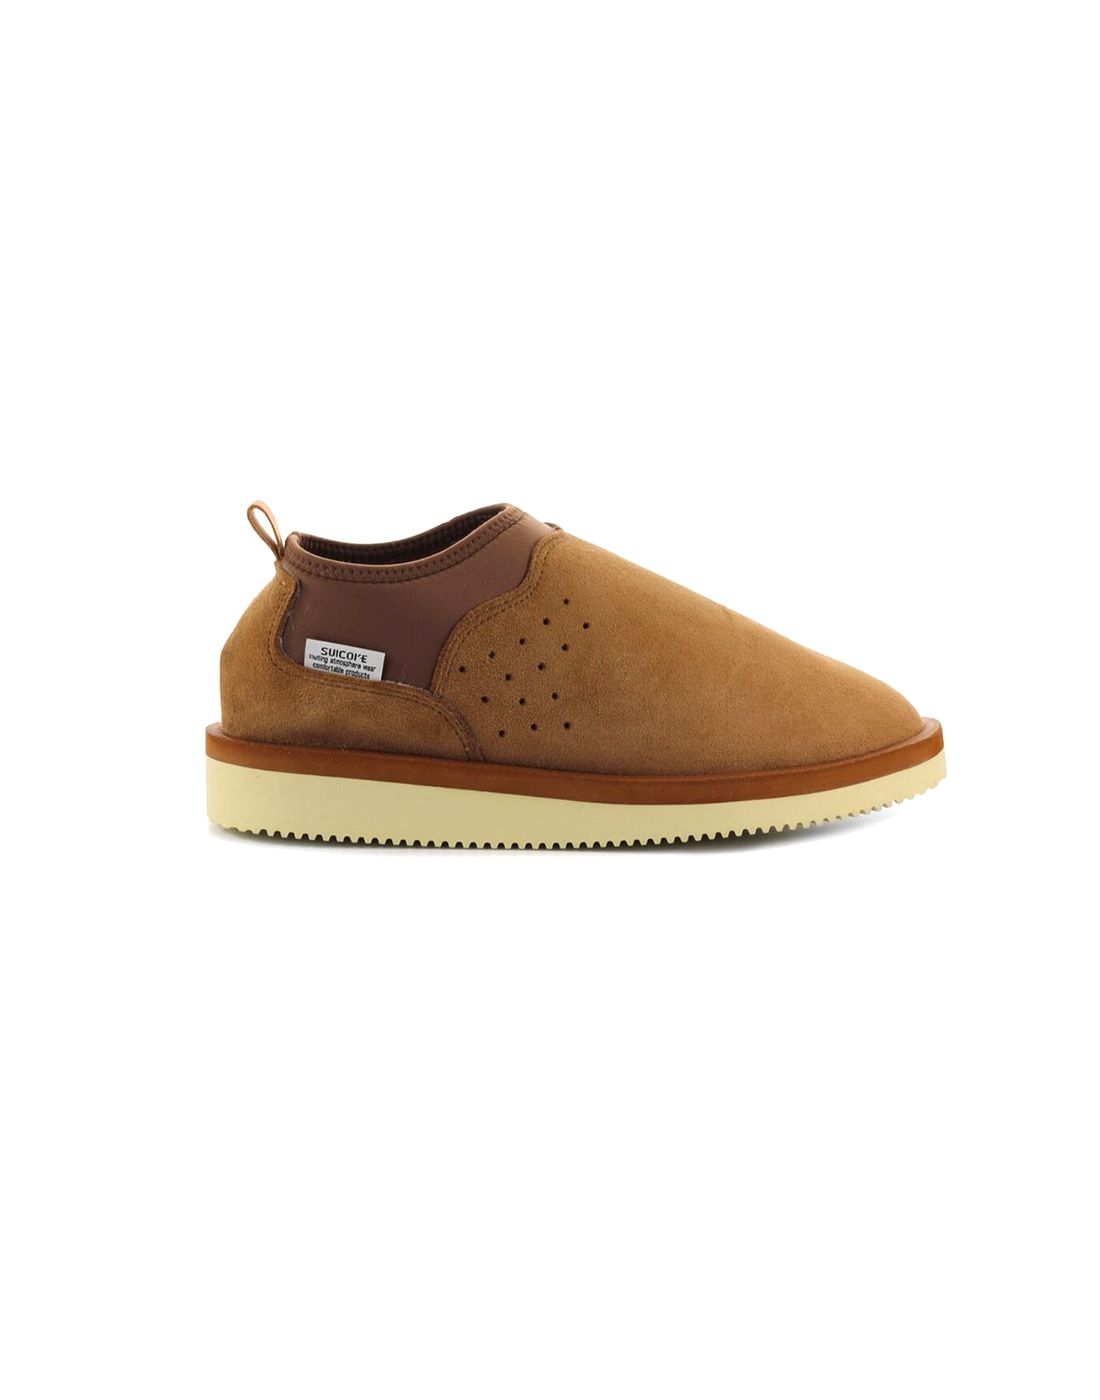 Shoes for women SUICOKE OG 073 M2AB MID BROWN